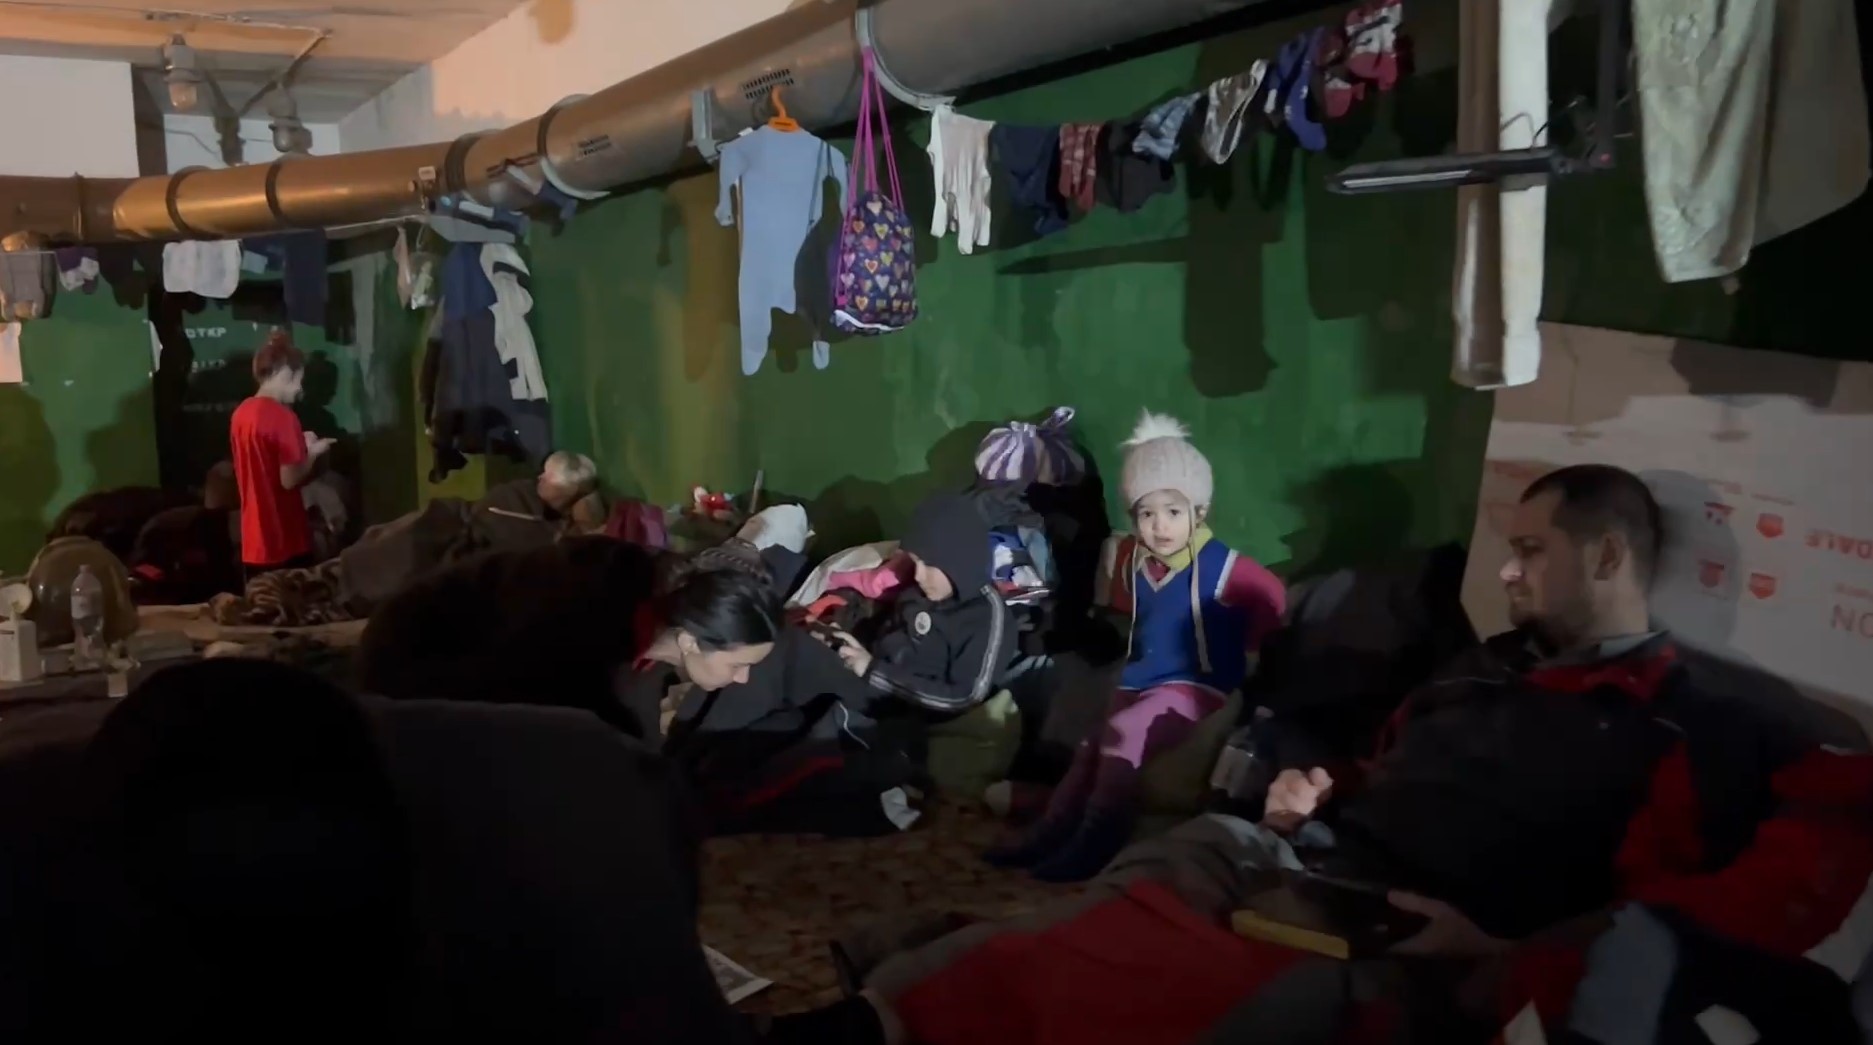 Civilian women and children sheltering in bunkers underneath the Azovstal steel factory in Mariupol, Ukraine, on April 18.